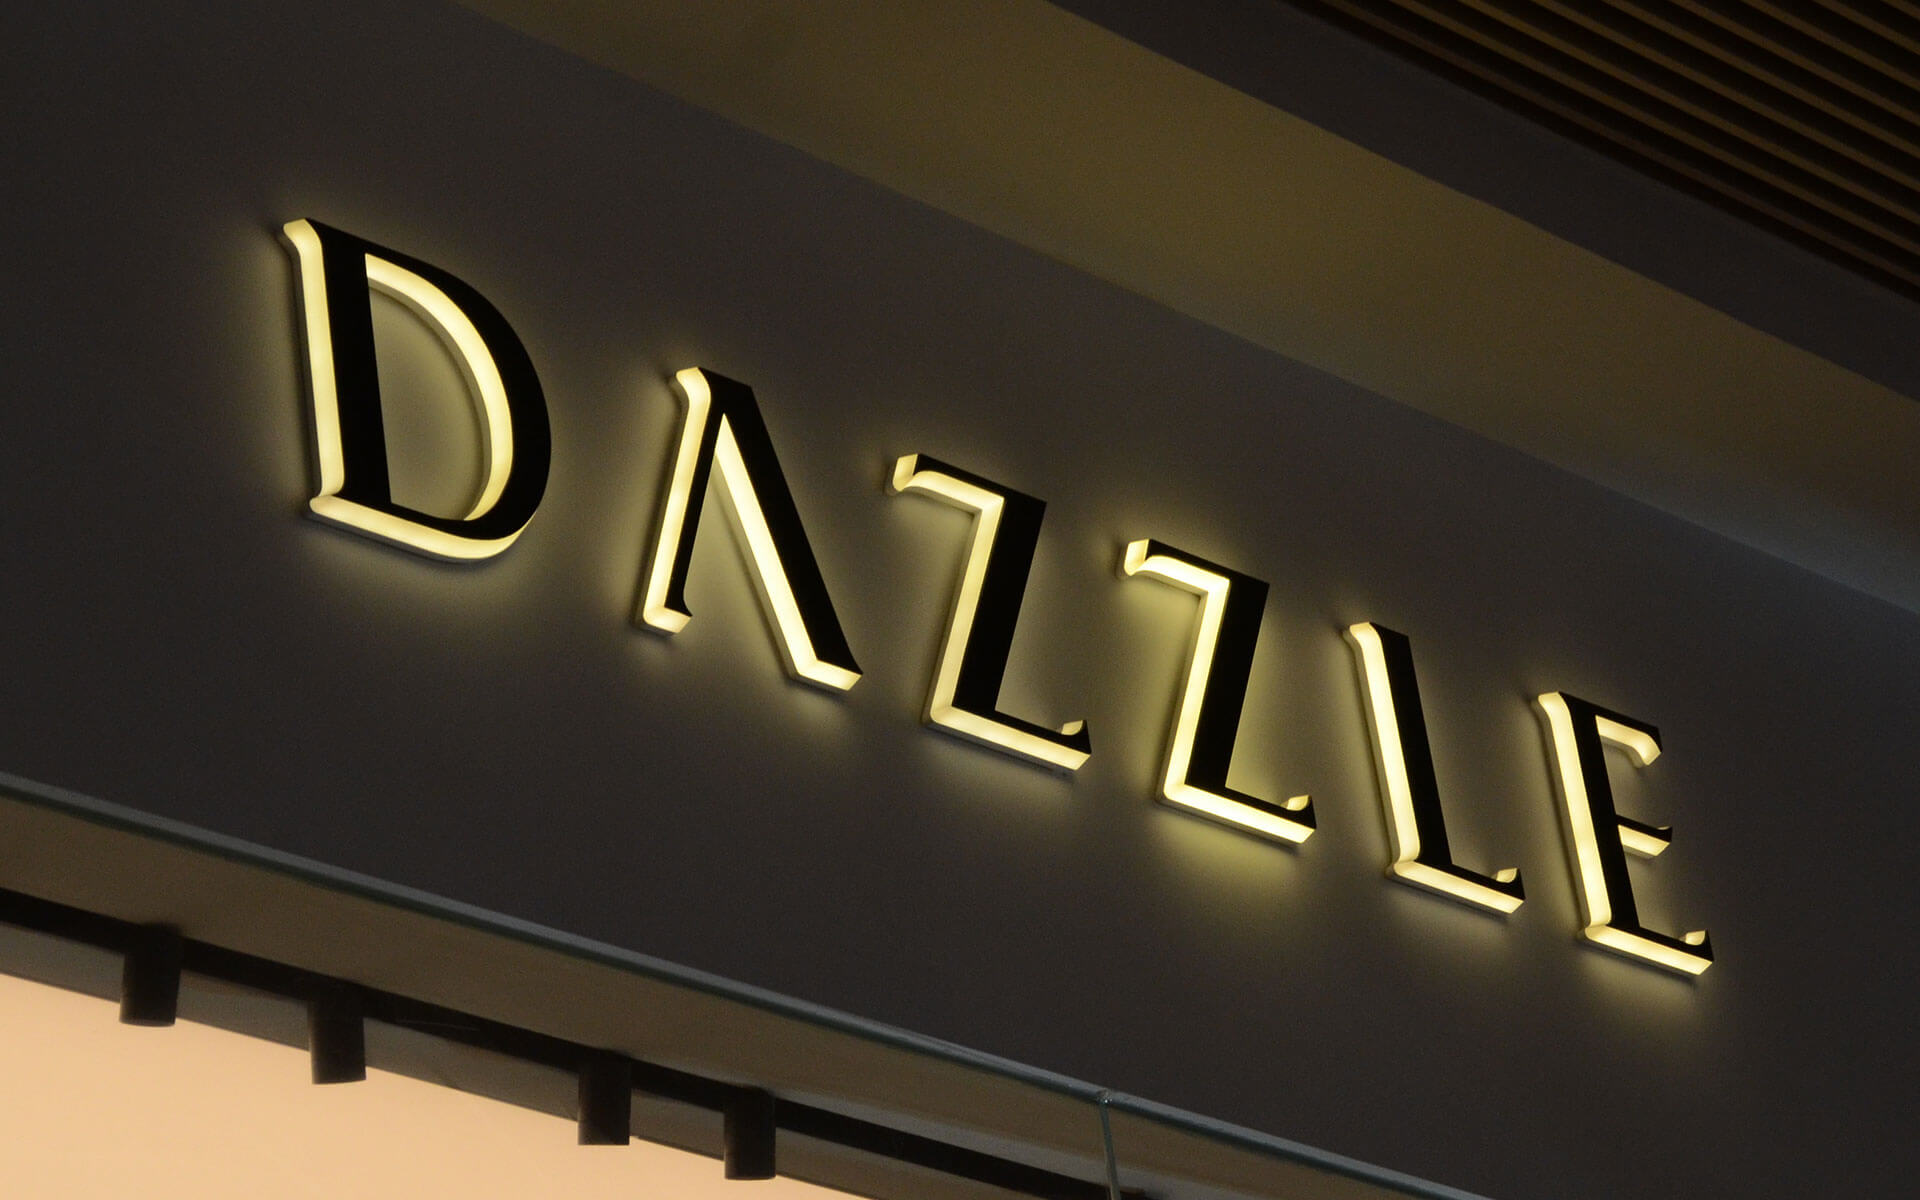 Side-lit Channel Letters for Dazzle